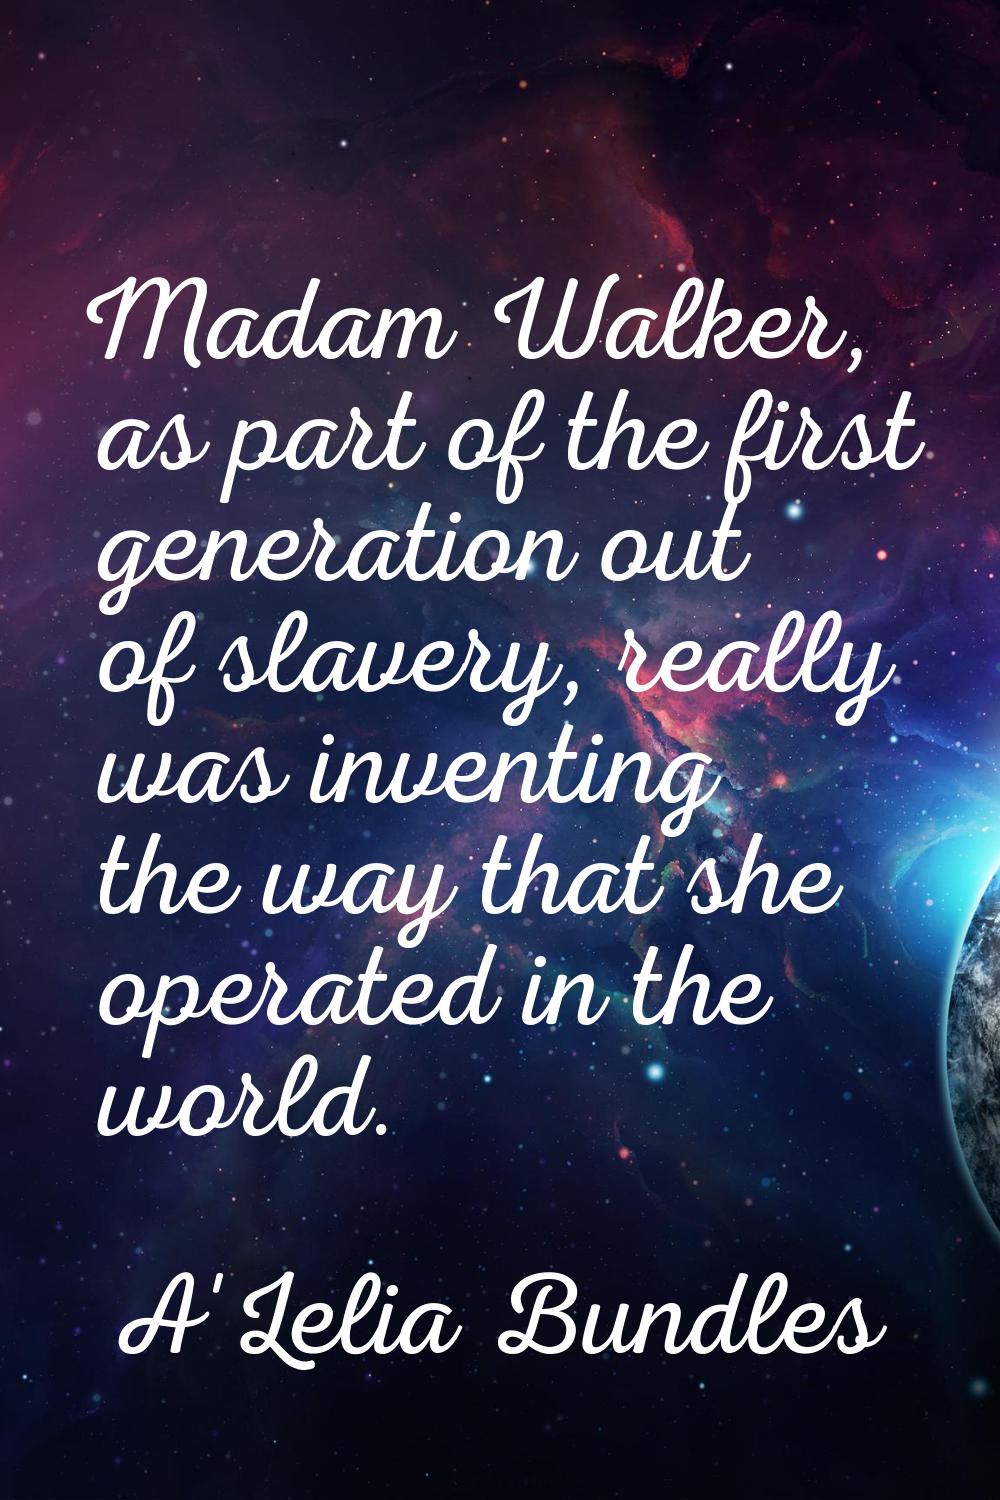 Madam Walker, as part of the first generation out of slavery, really was inventing the way that she